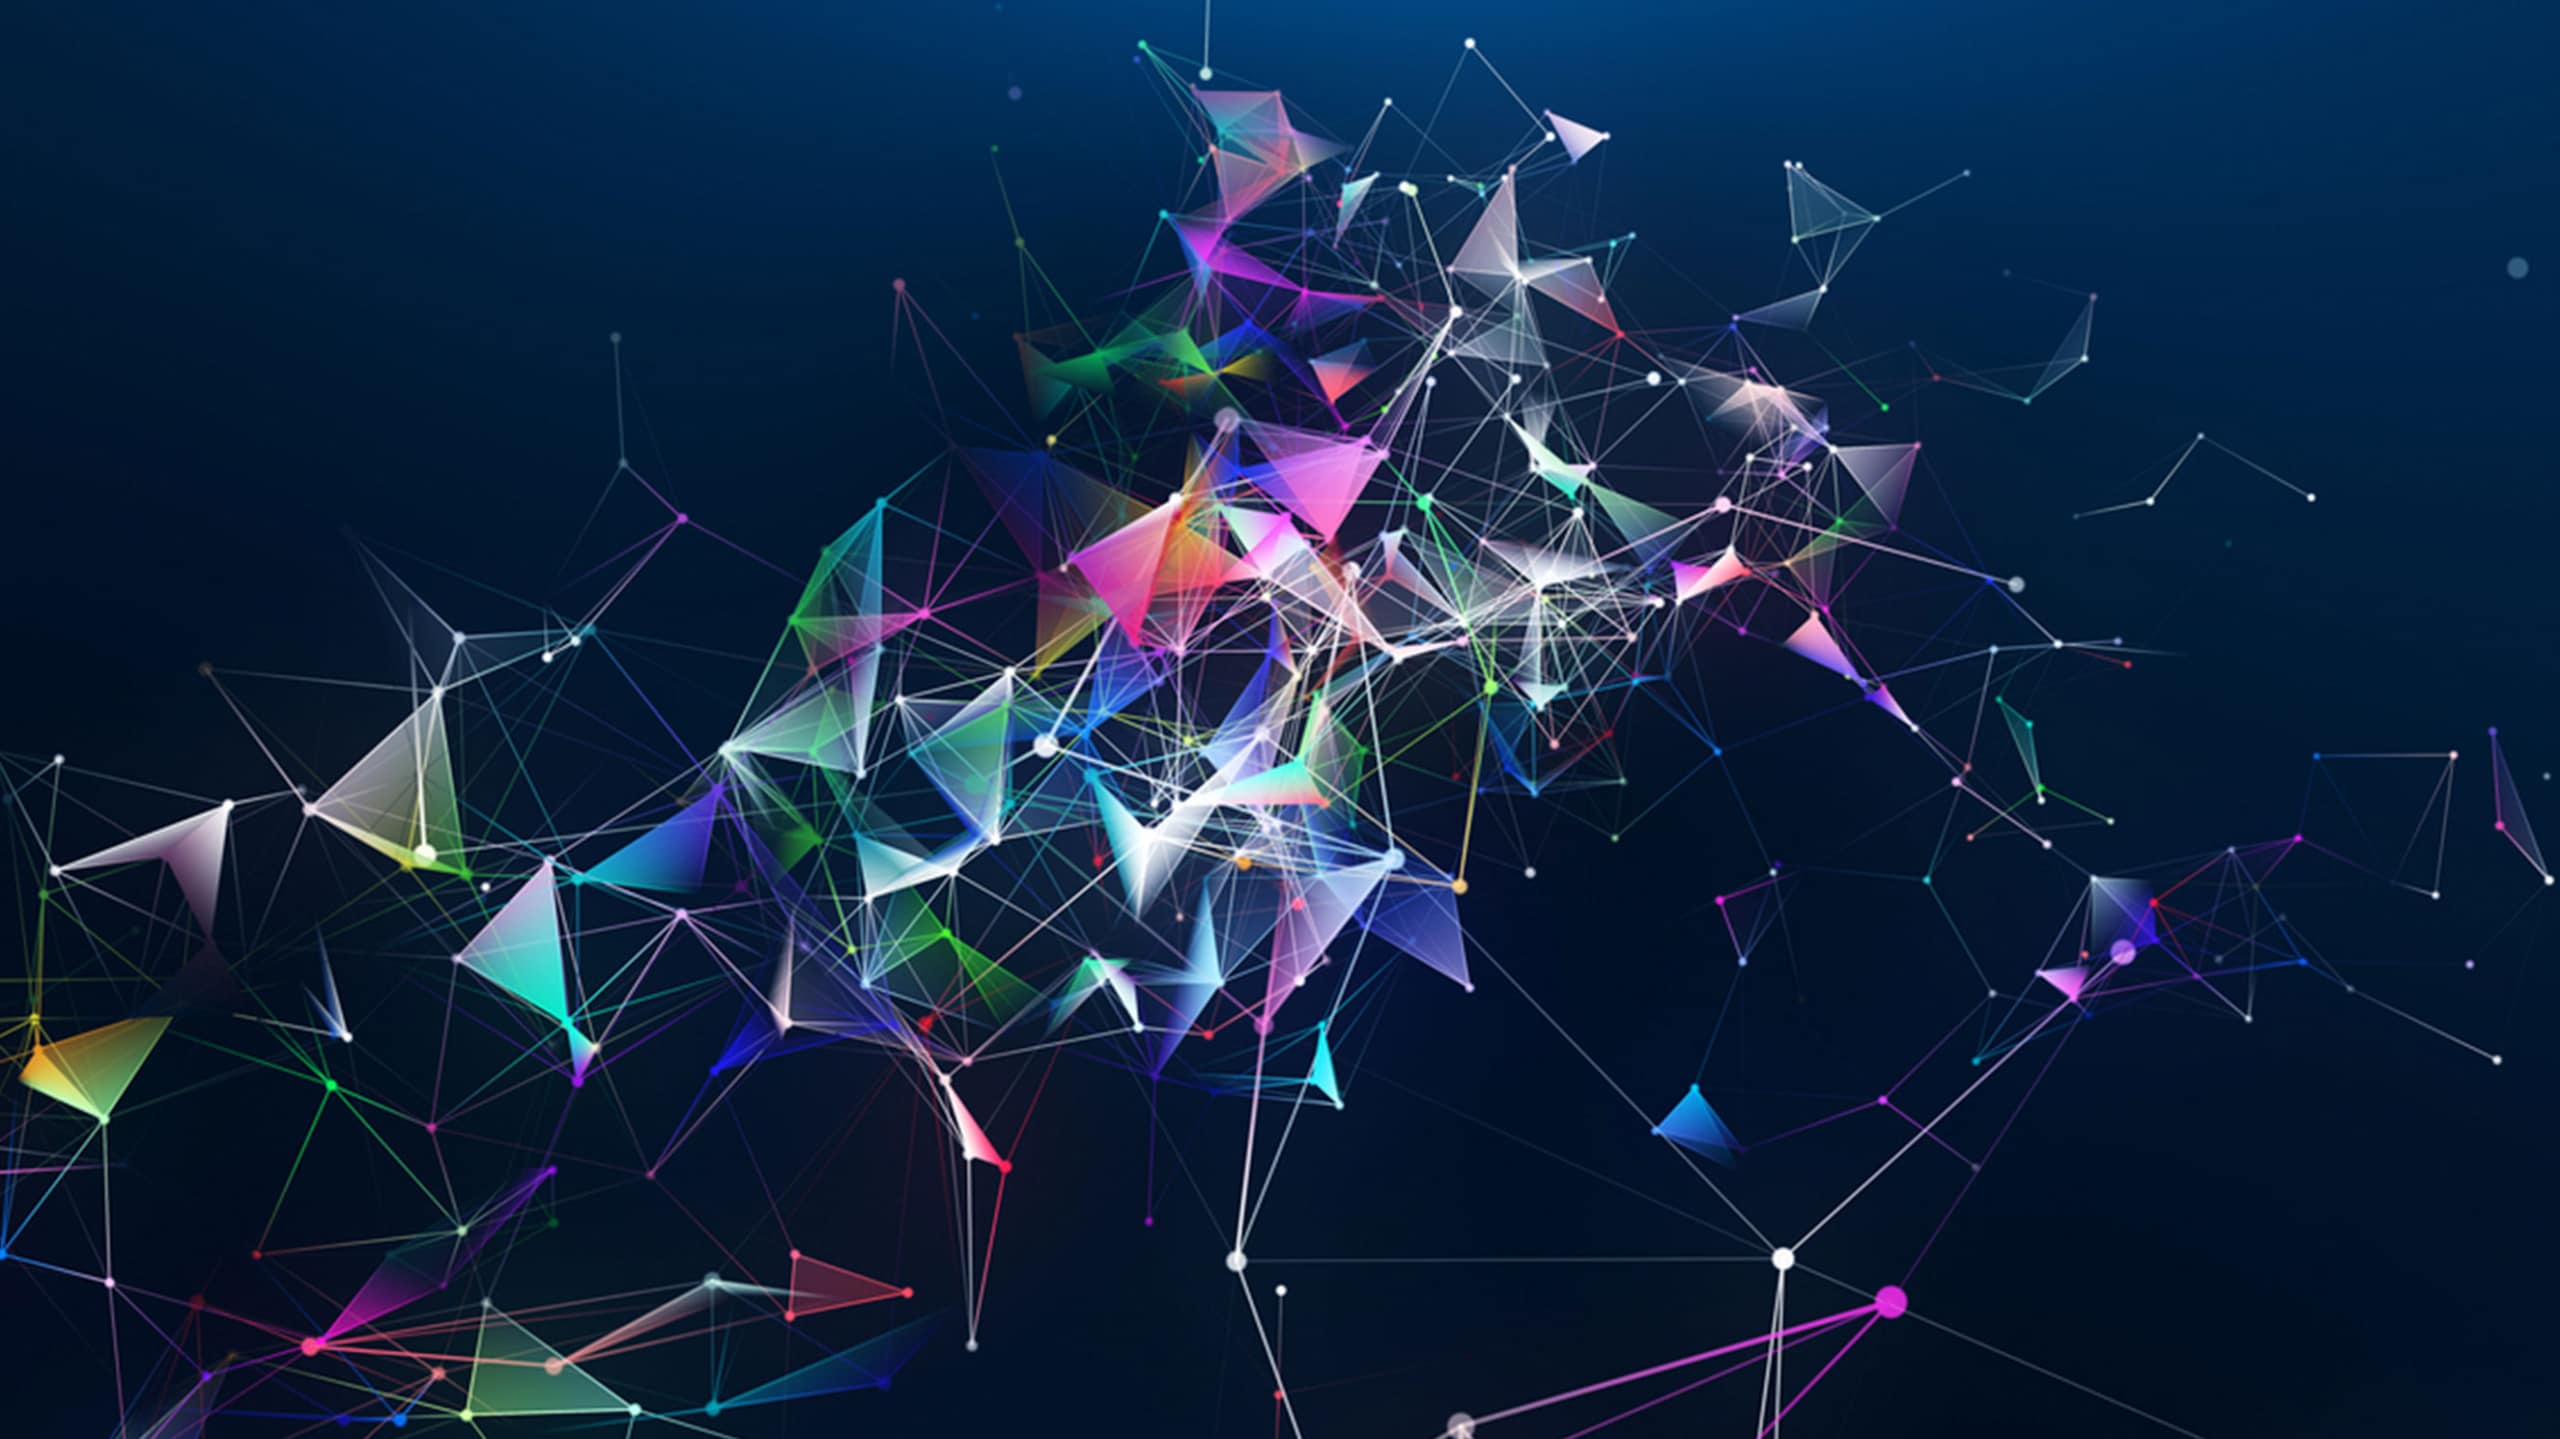 A dynamic digital artwork featuring an abstract network of interconnected lines and polygons in vibrant colors, floating against a dark blue background.